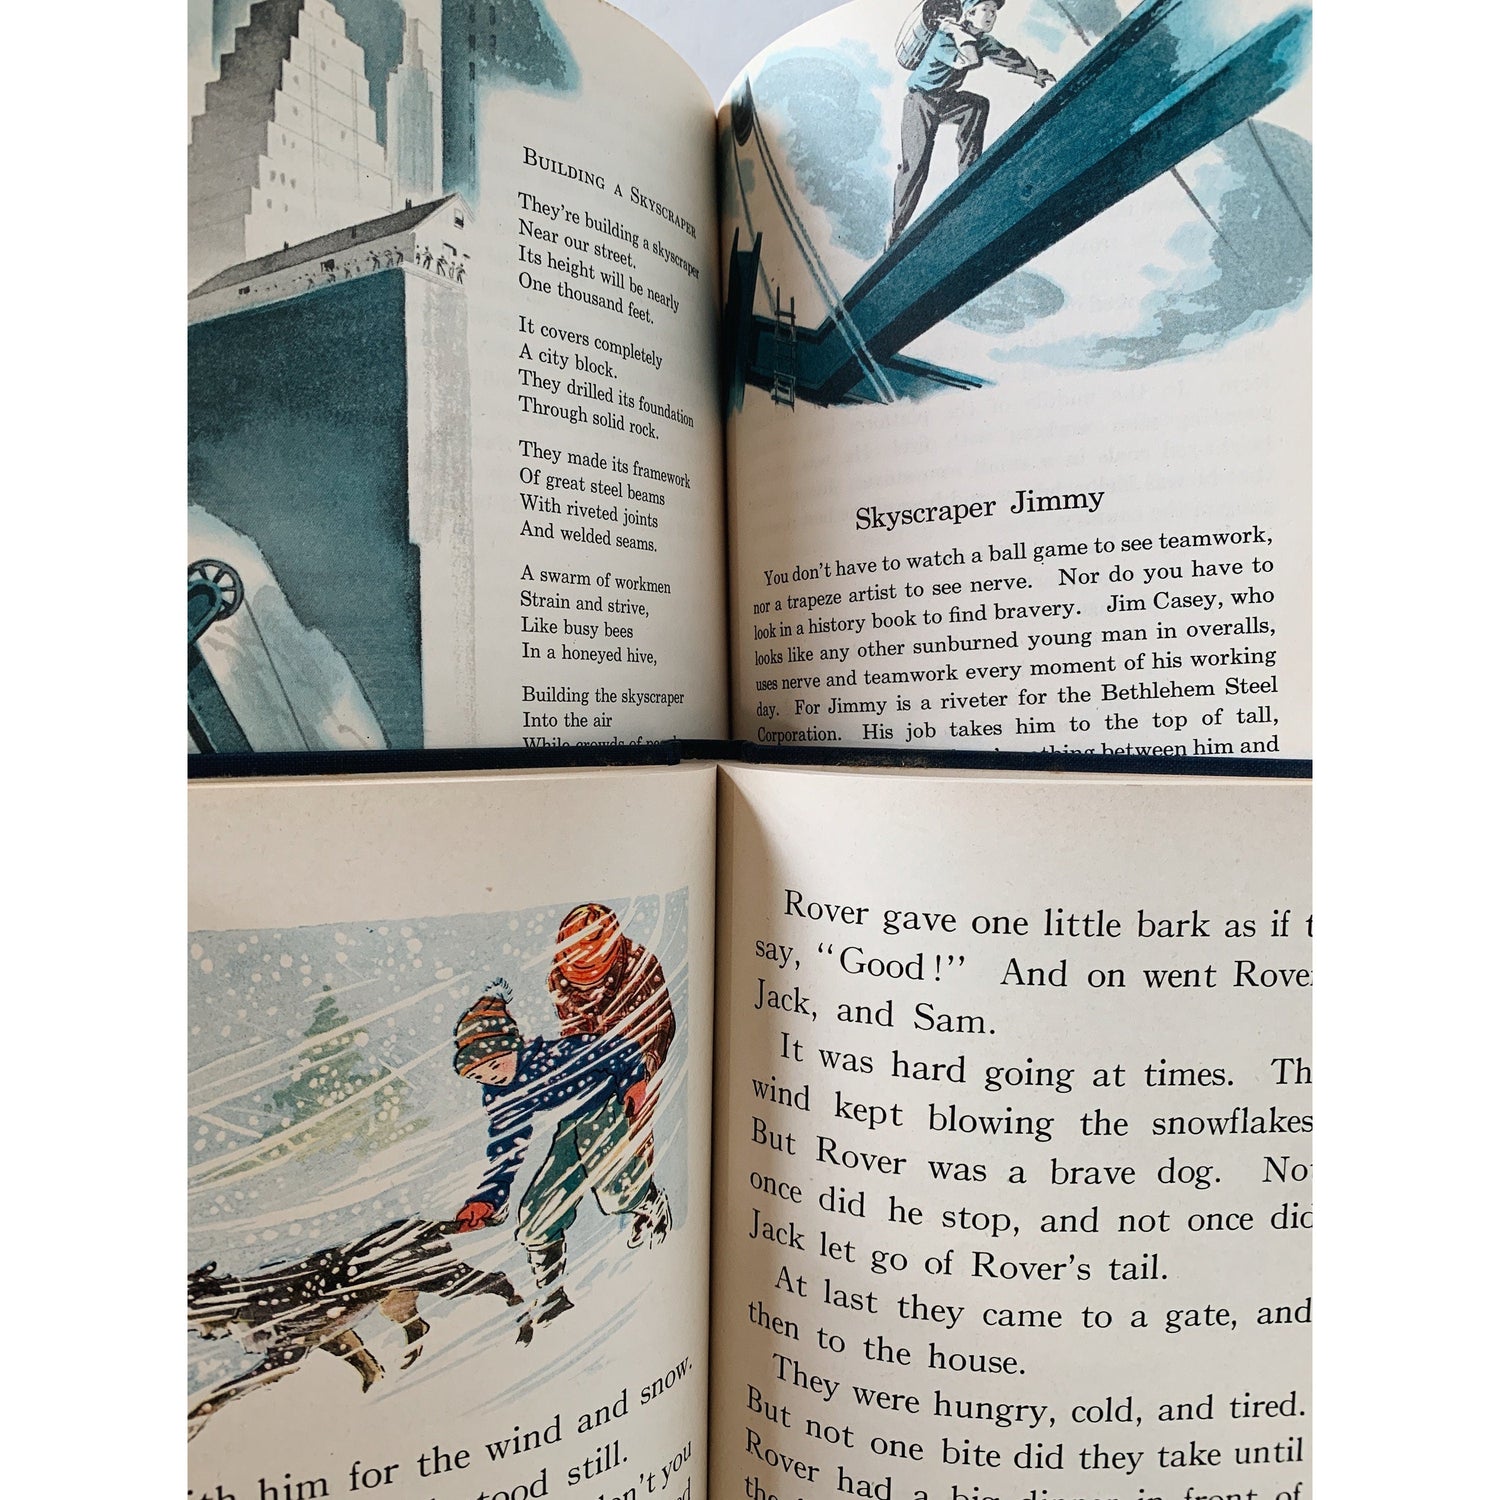 Vintage Blue and Red School Book Bundle, 1930s and 1950s